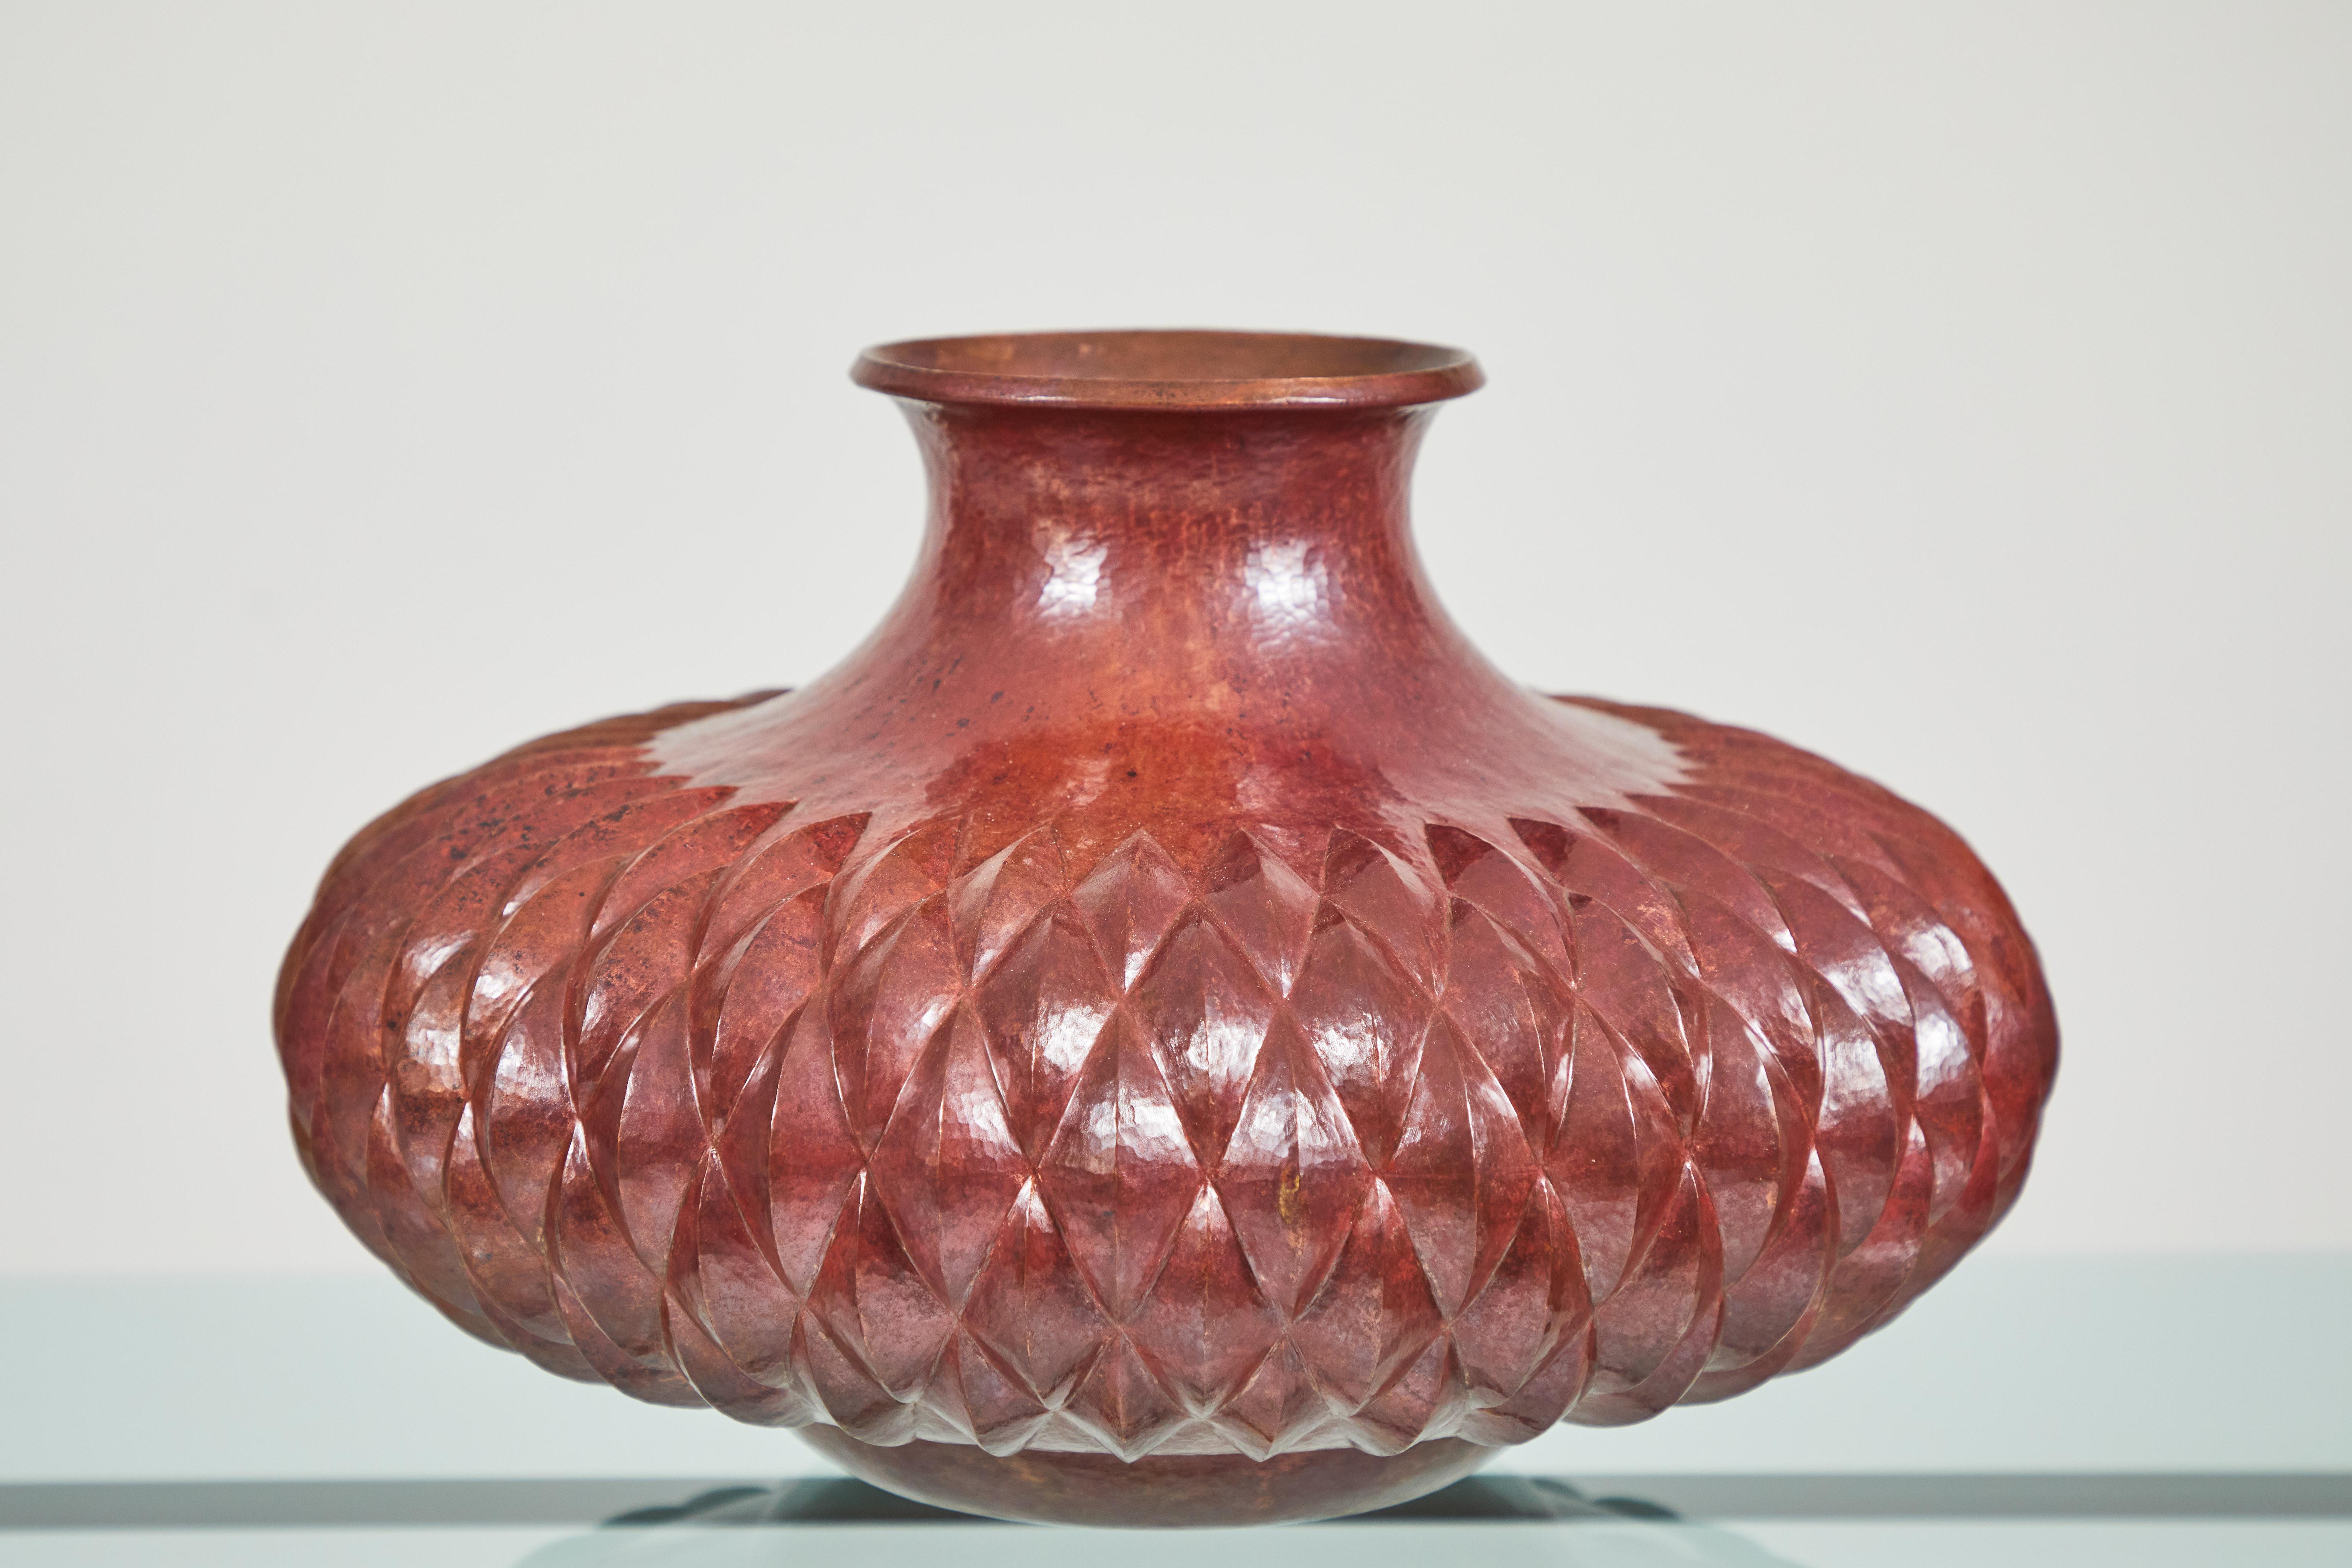 Made by Ignacio Punzo Ángel, this copper vase has been hand burnished and chased in a multiple diamond shaped pattern. The Punzo family is well known for their copper and silver craftsmanship. Located in Santa Clara Del Cobre in Mexico, the mastery